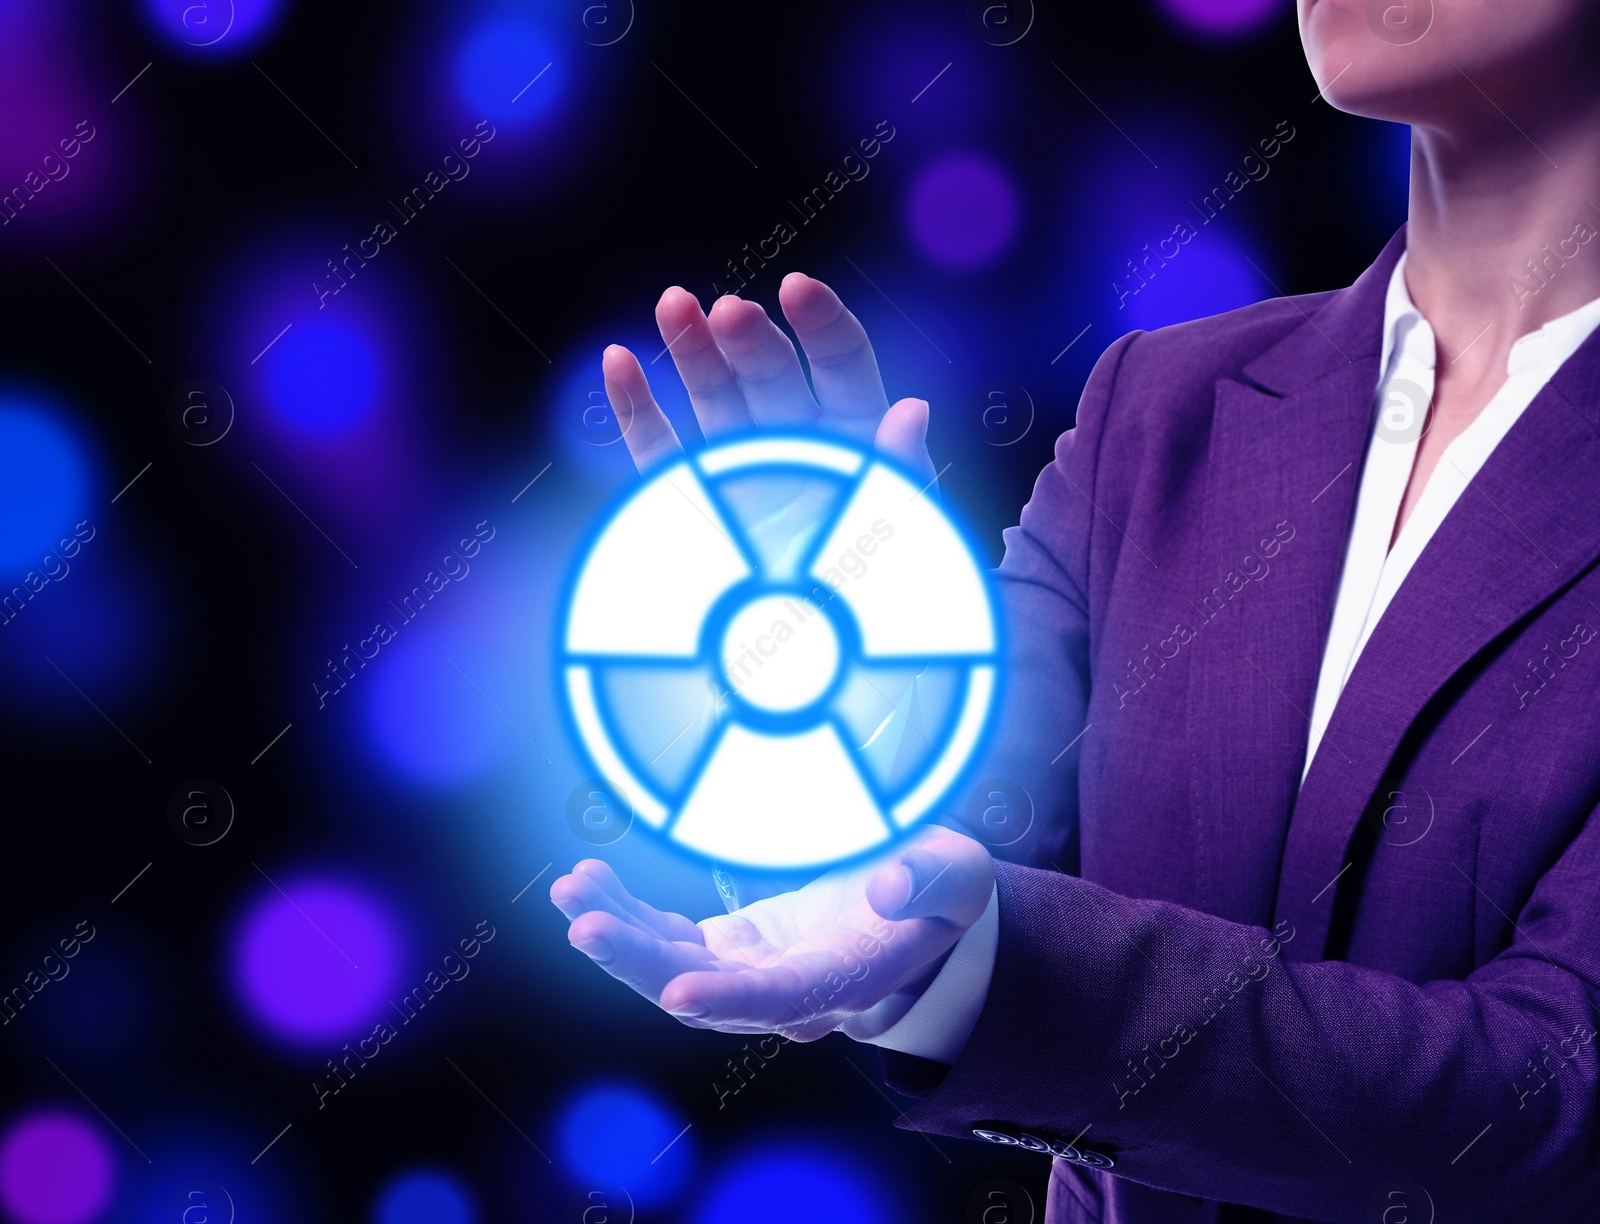 Image of Woman holding glowing radiation warning symbol on dark background with blue and purple blurred lights, closeup